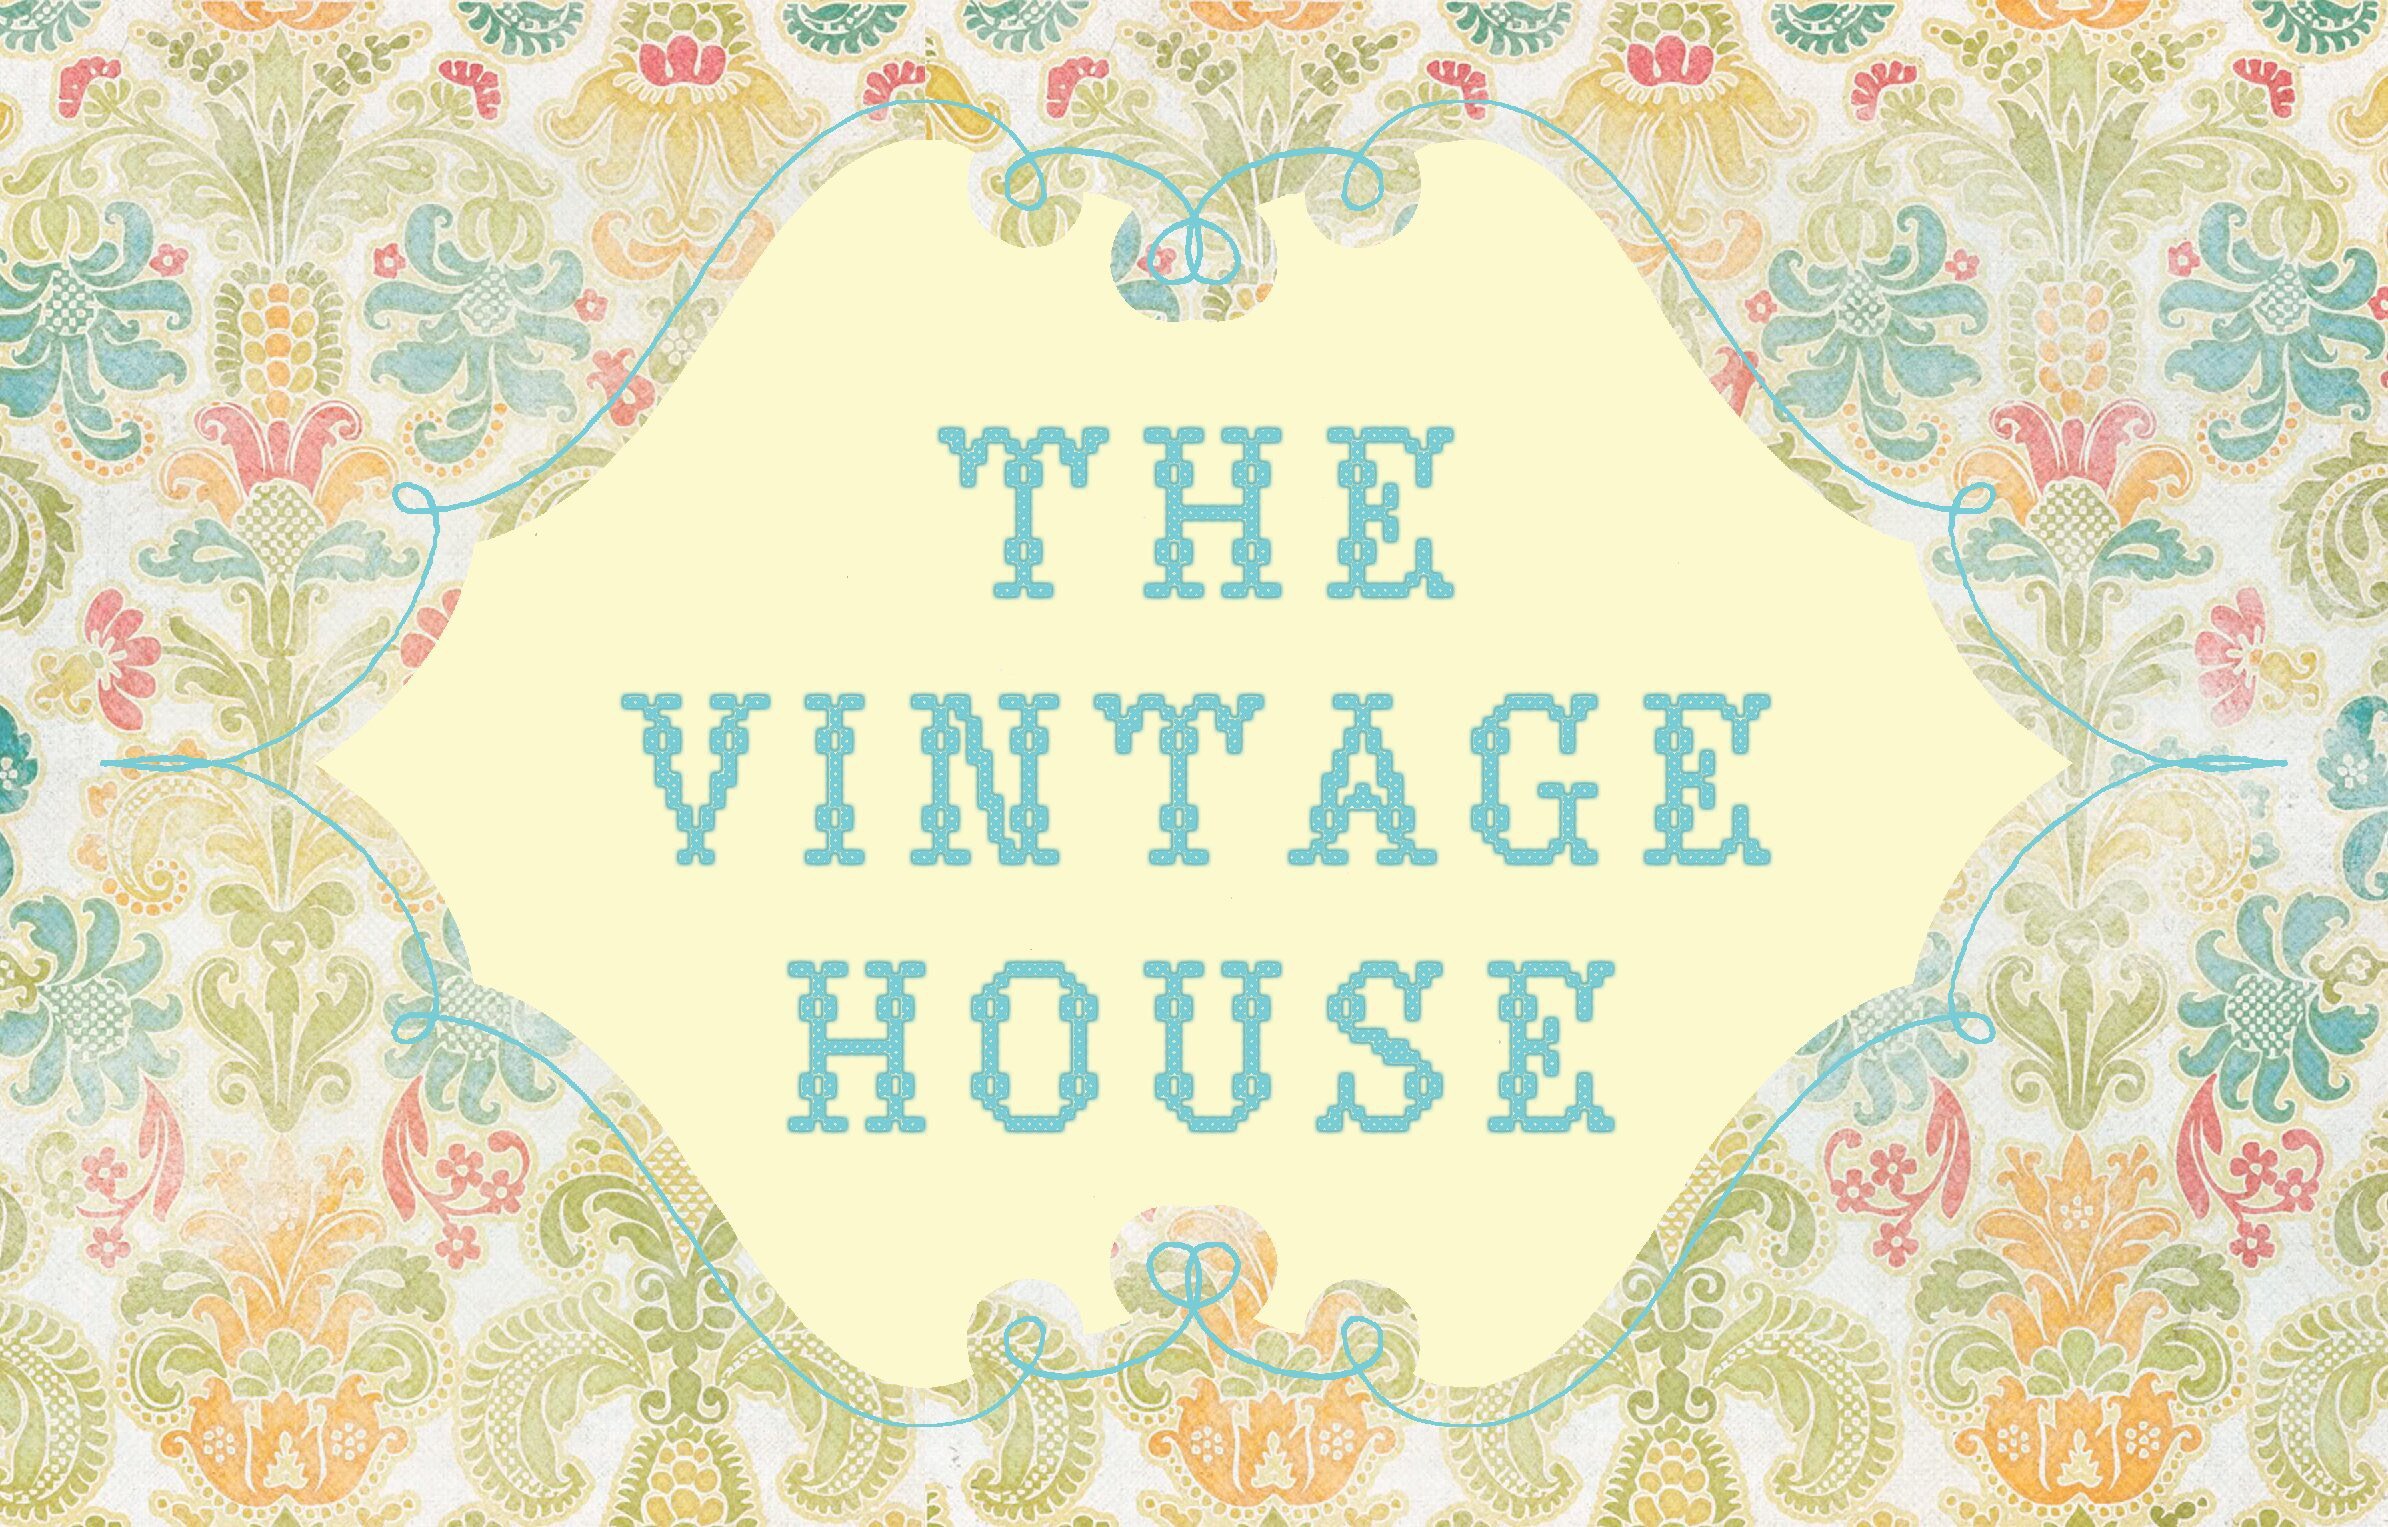 The Vintage House